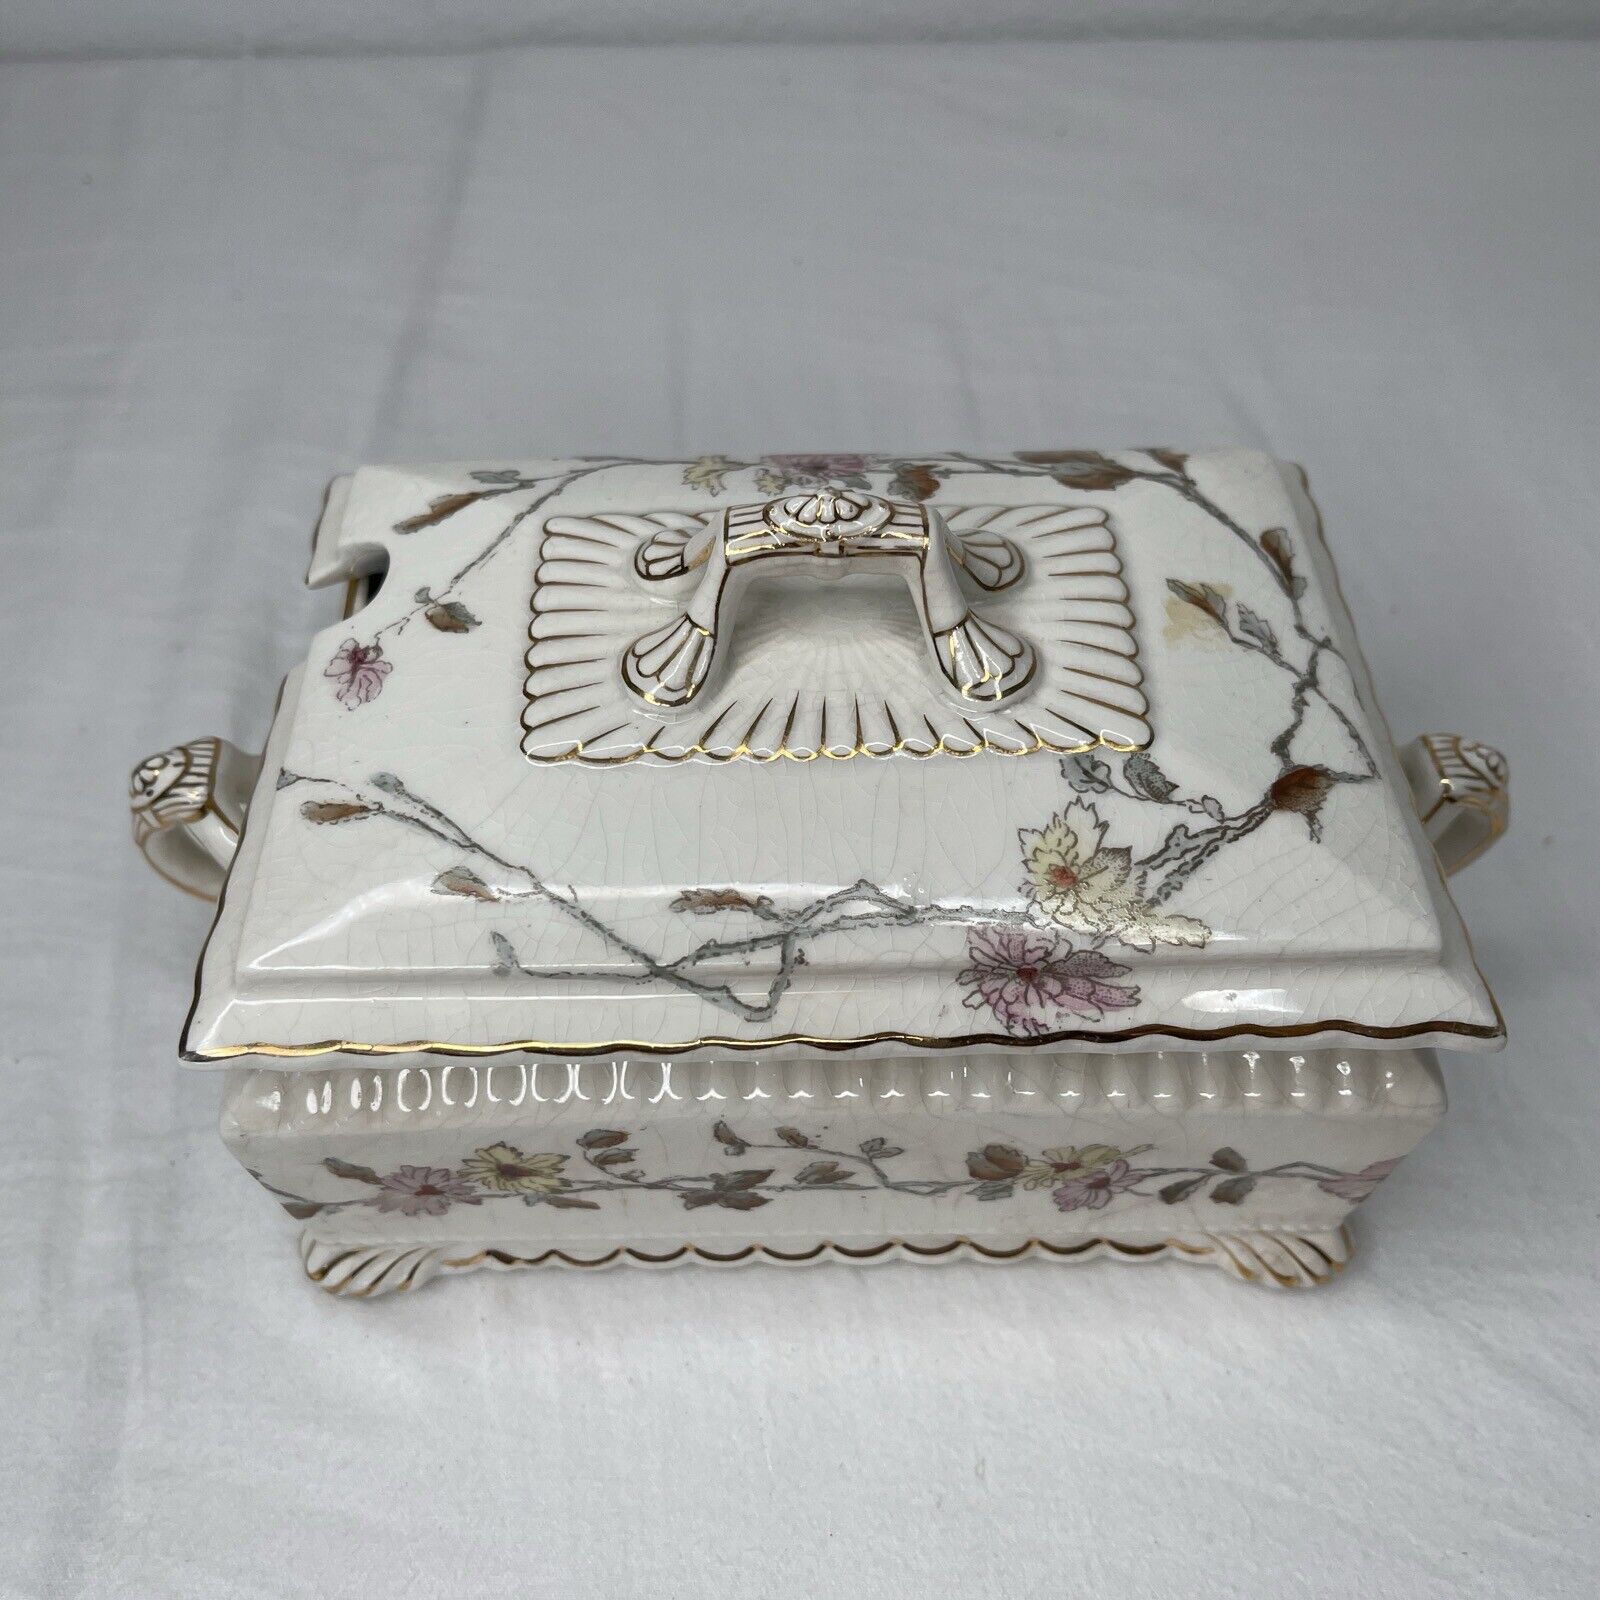 Antique Imperial Warranted China Rectangular Tureen W/lid Rimmed In gold